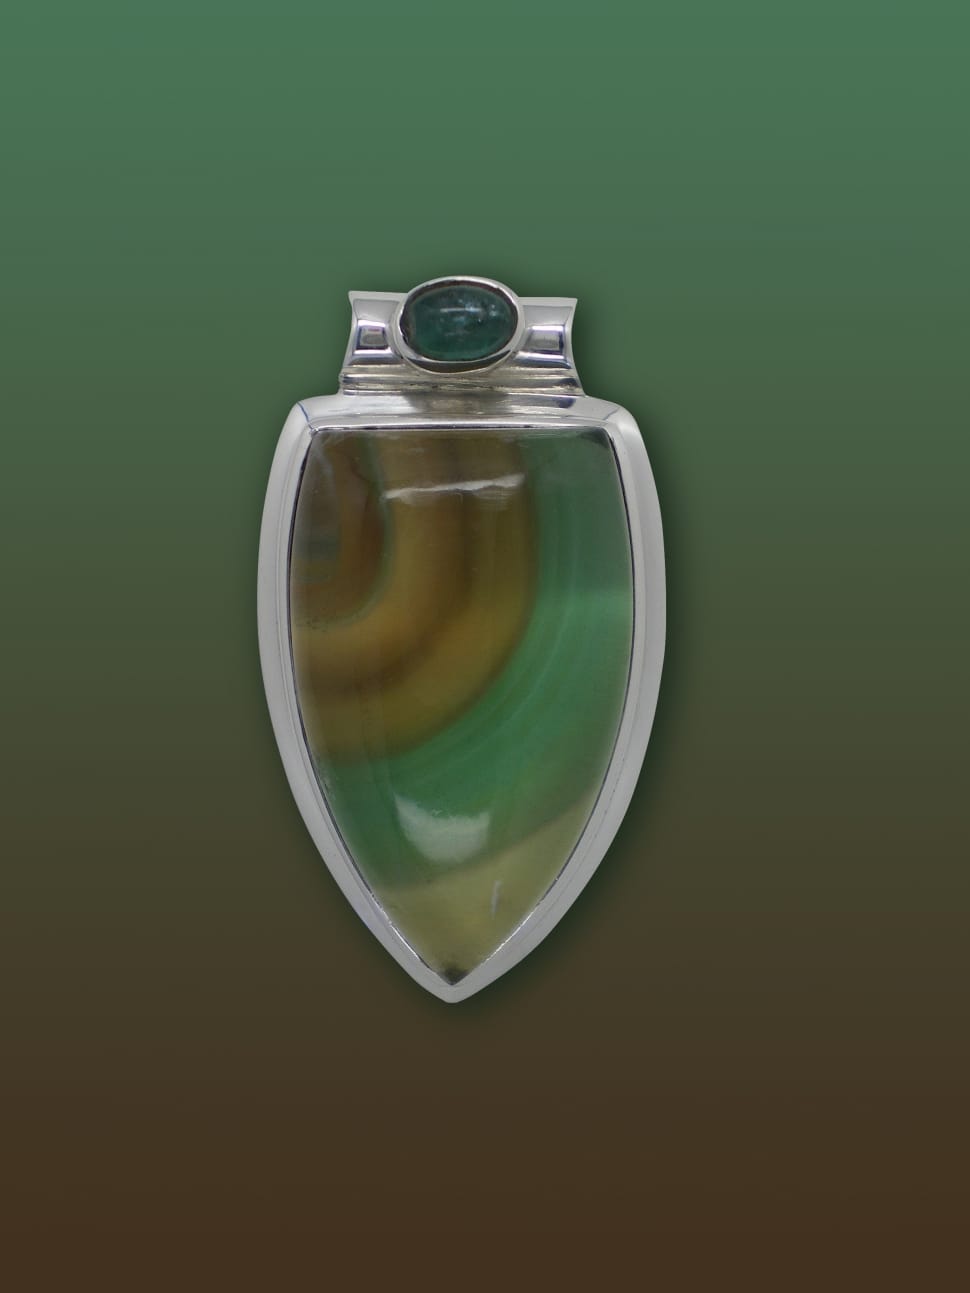 Gem, Jewellery, Trailers, Agate, green color, no people preview